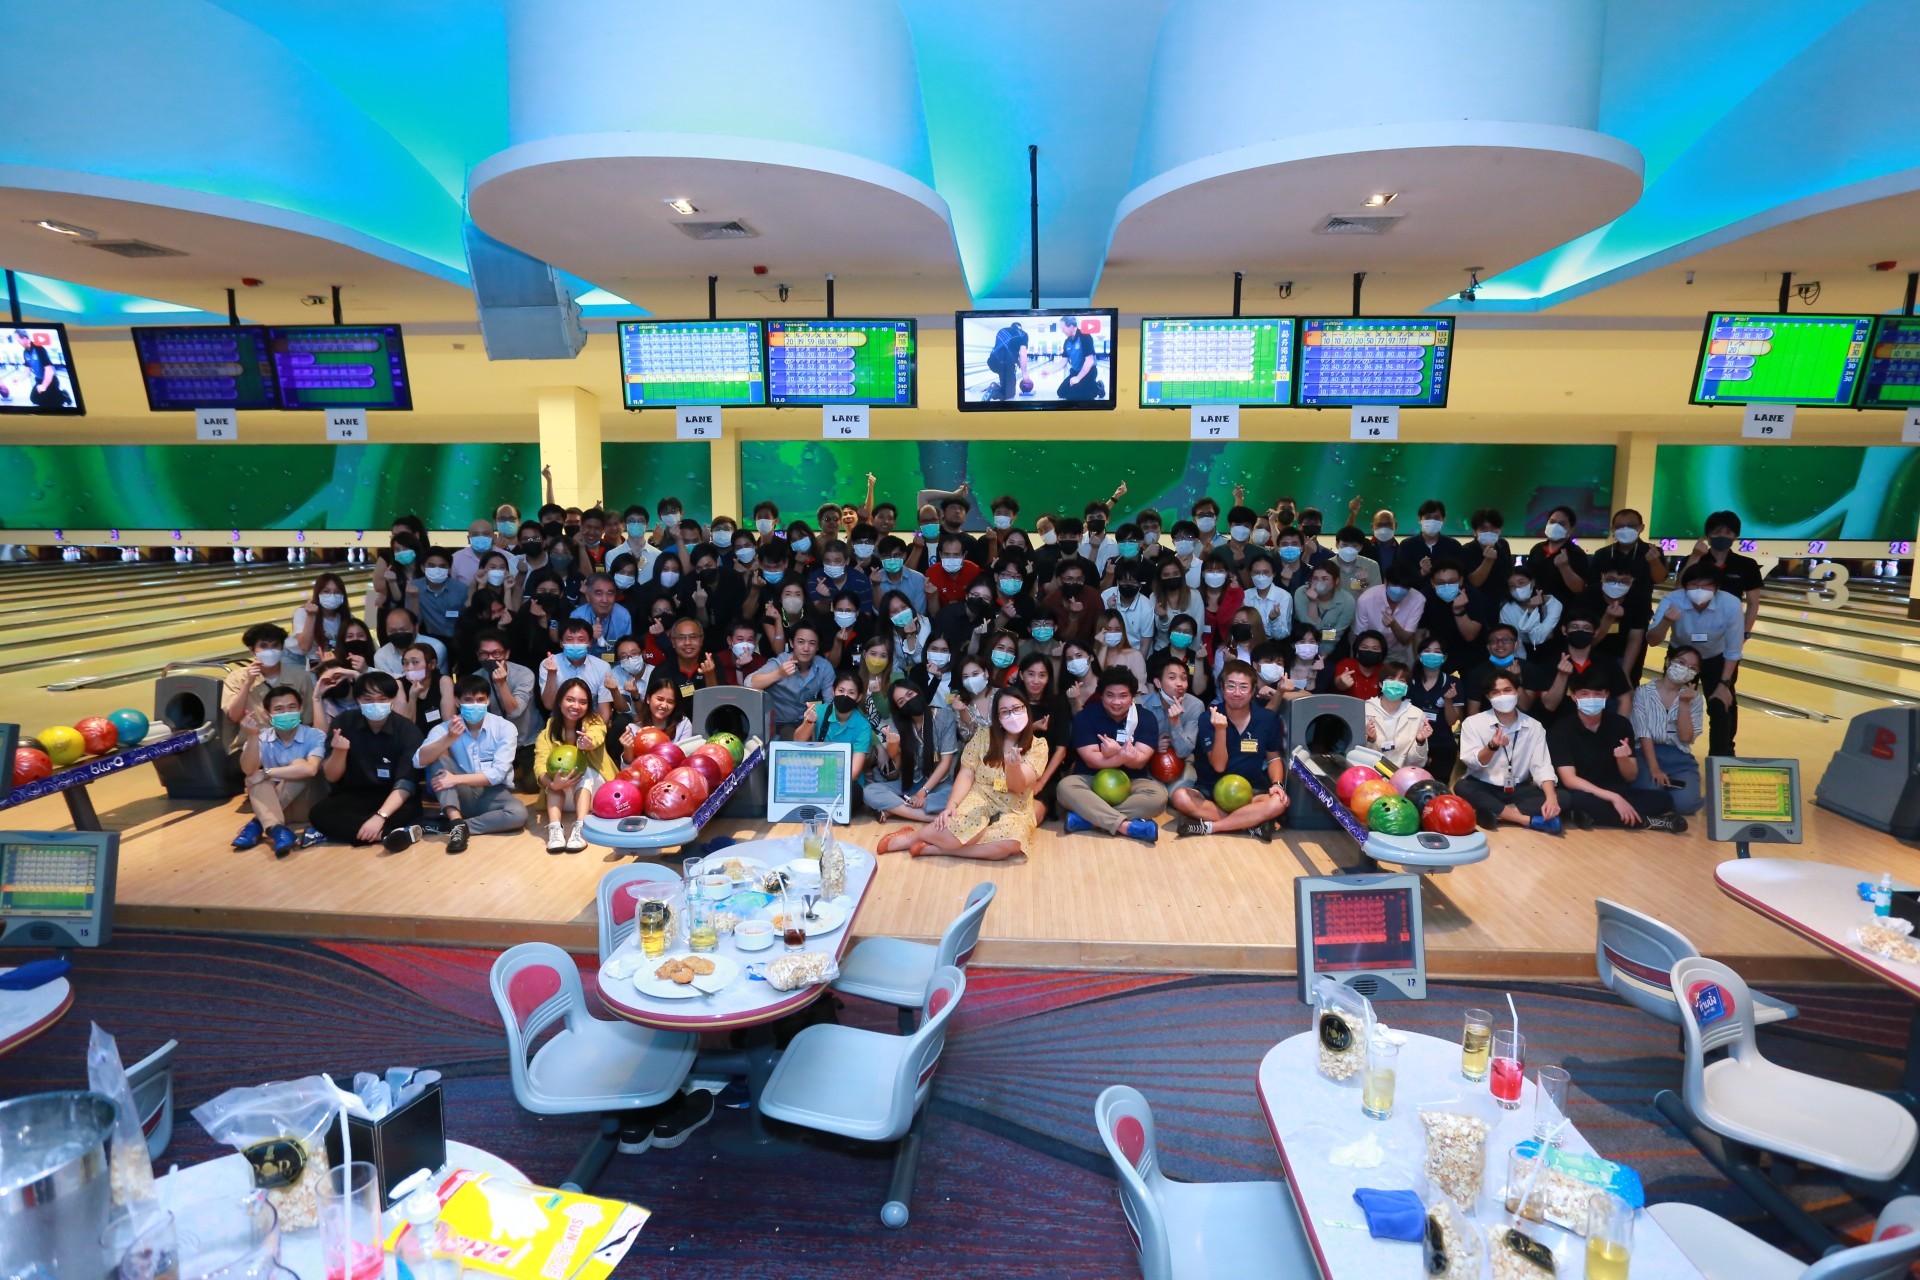 We held Internal Sport Day on 9 September 2022 at Blu-O Siam Paragon.